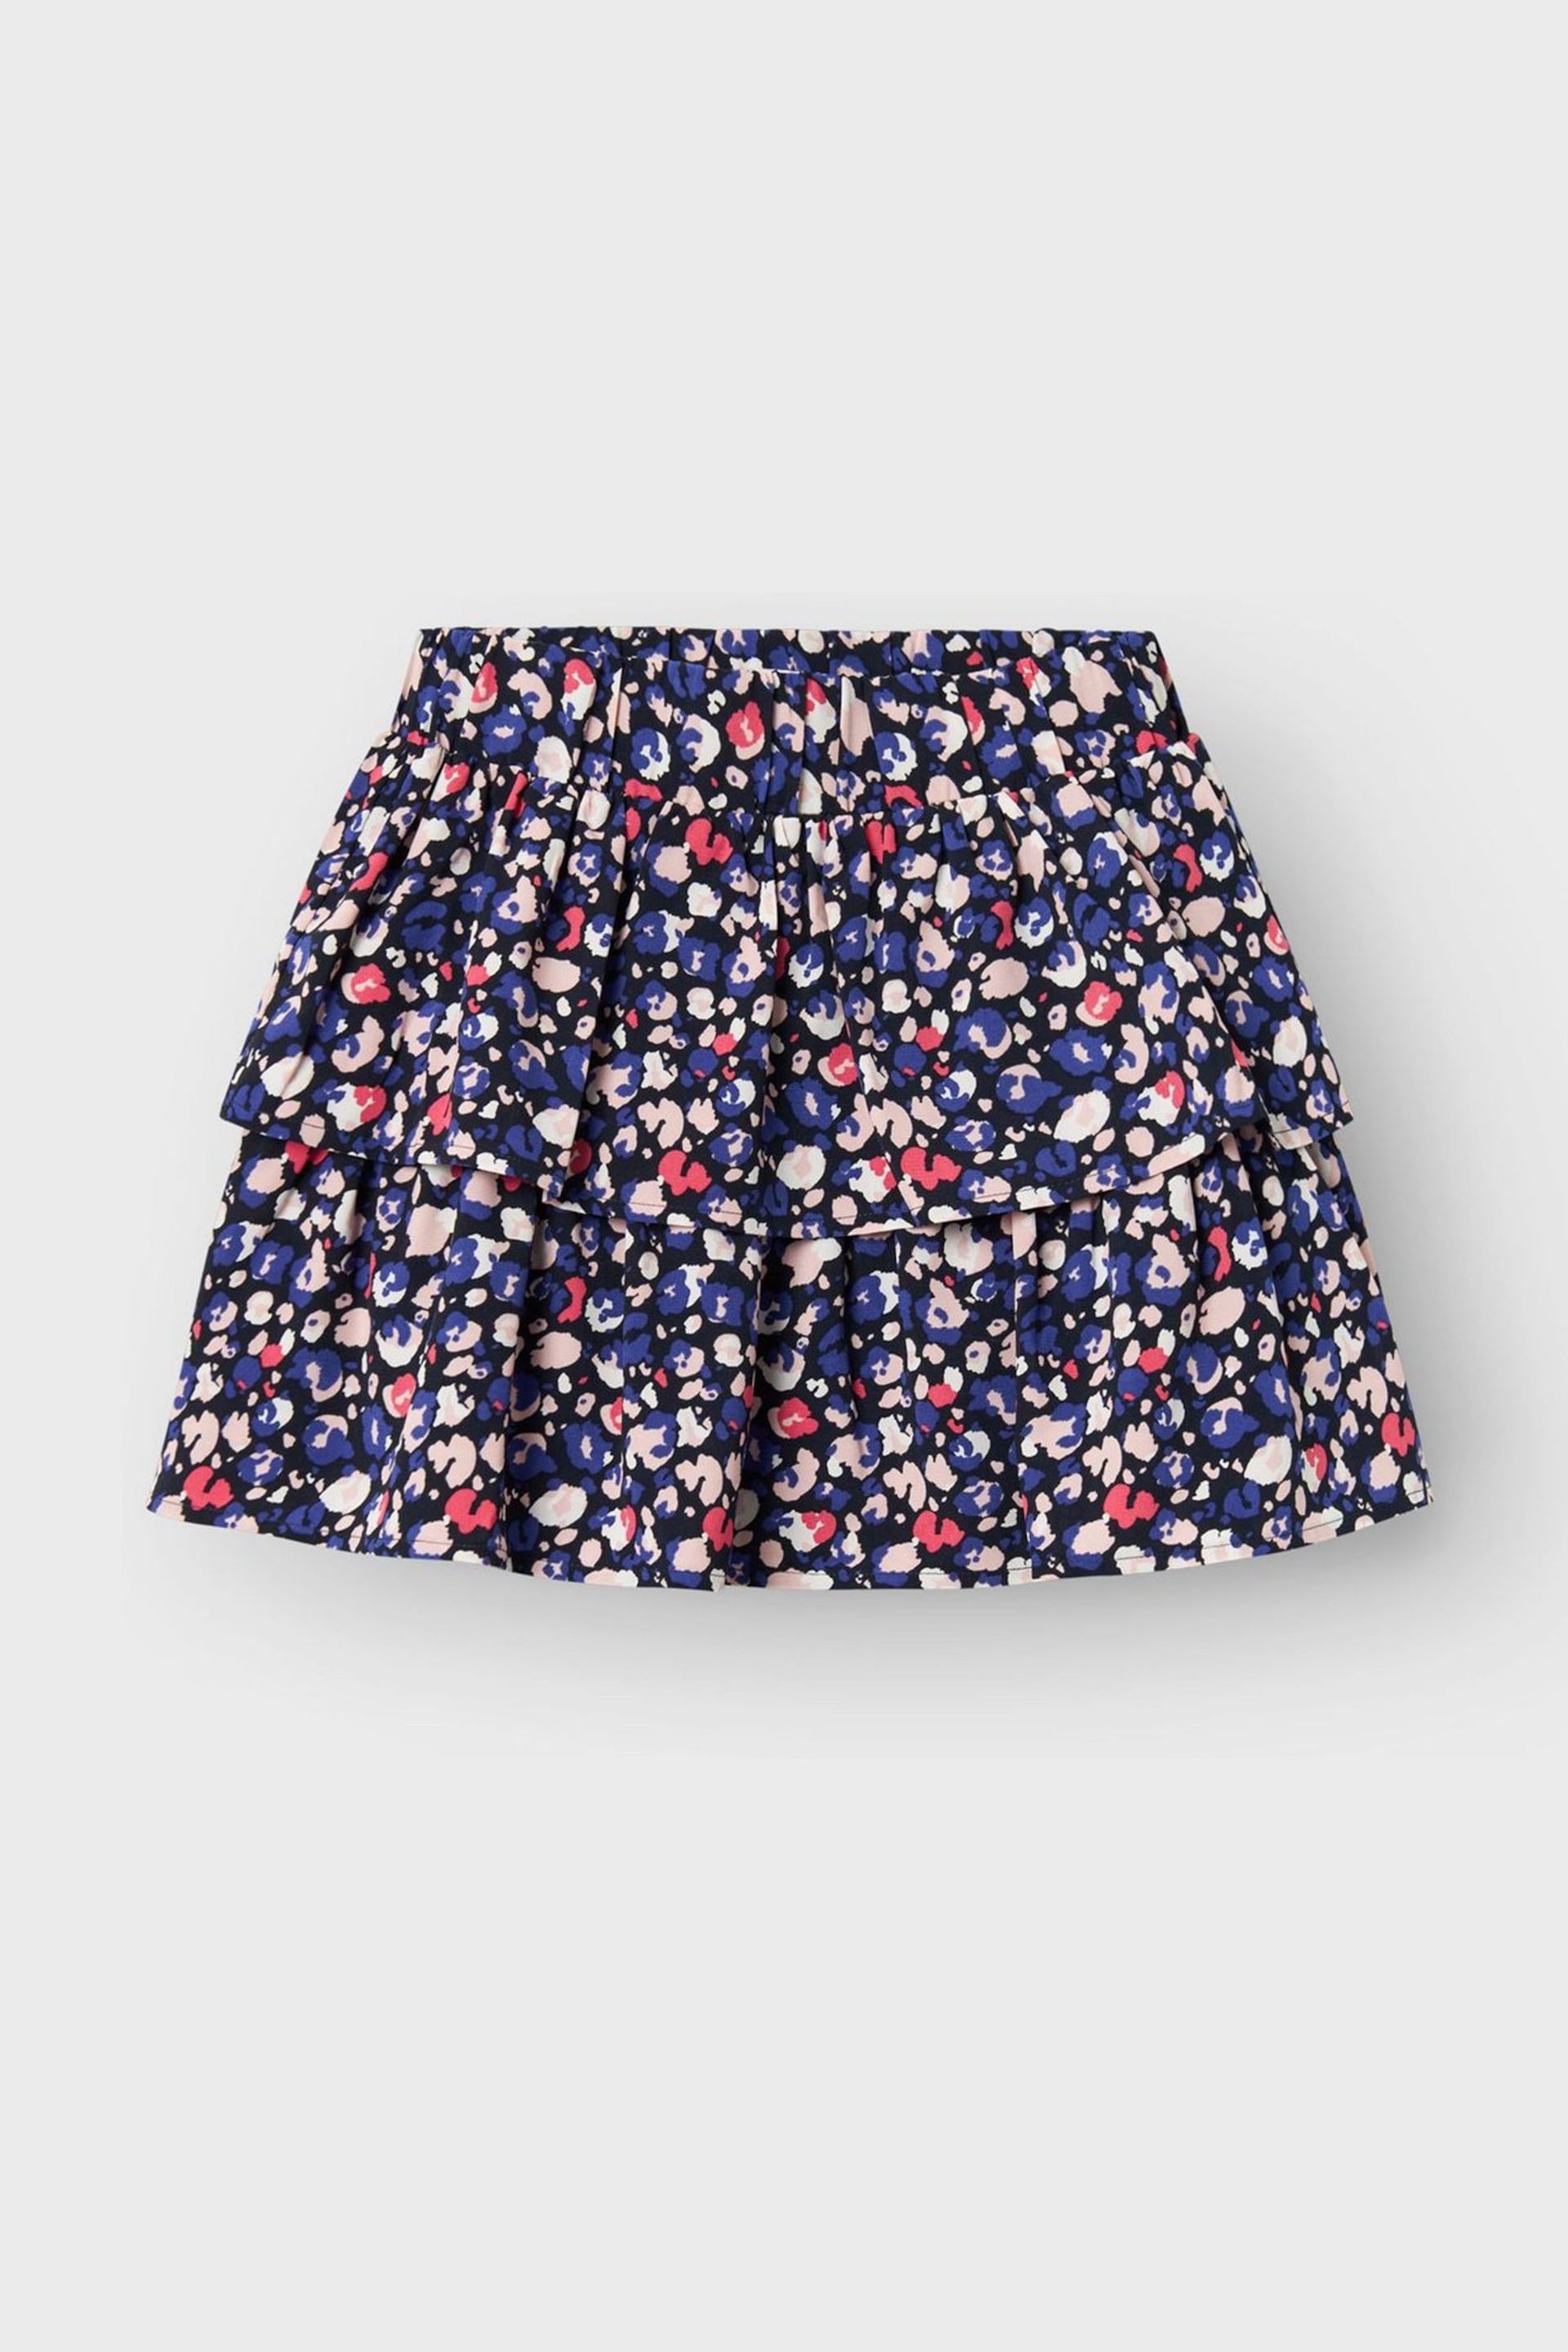 Name It Blue Printed Skirt - Image 2 of 3